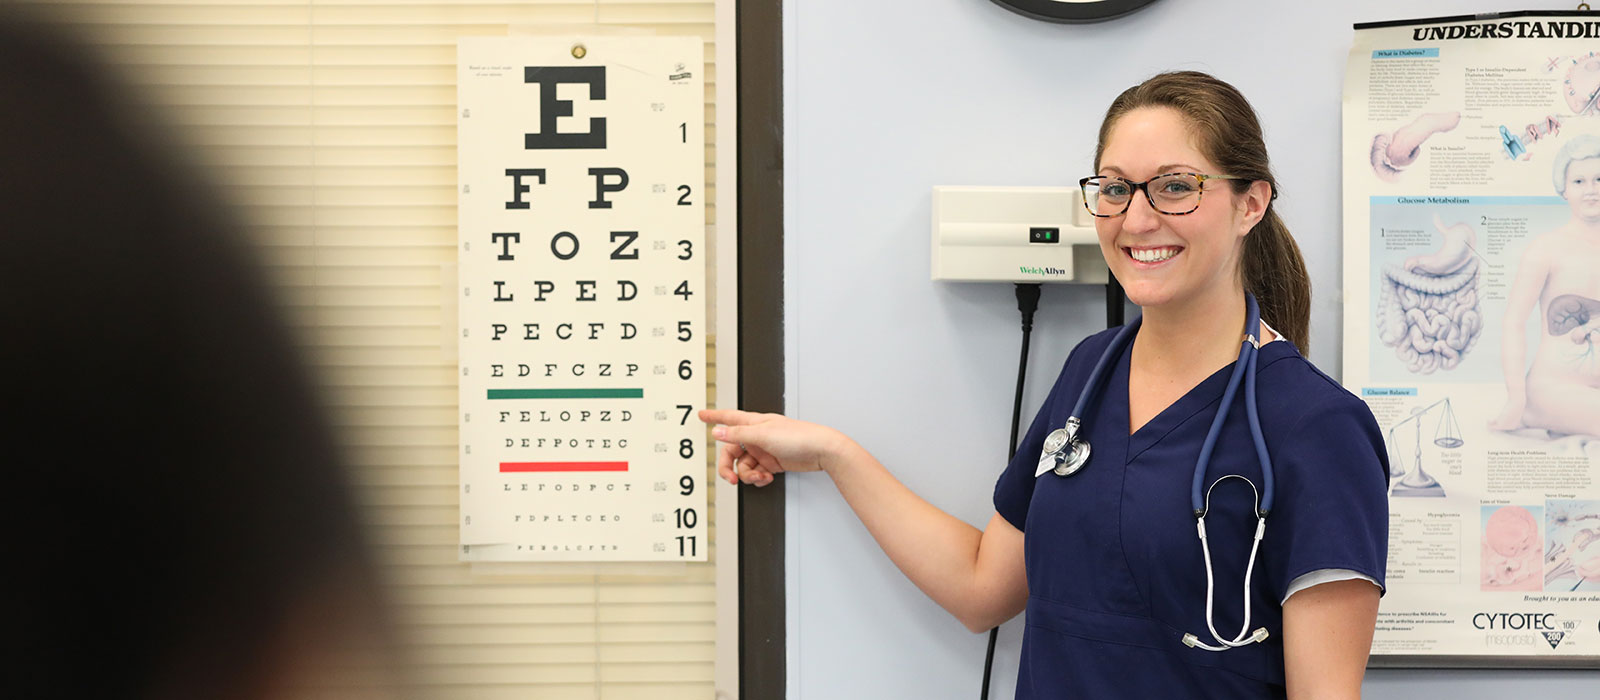 Student pointing at eye chart